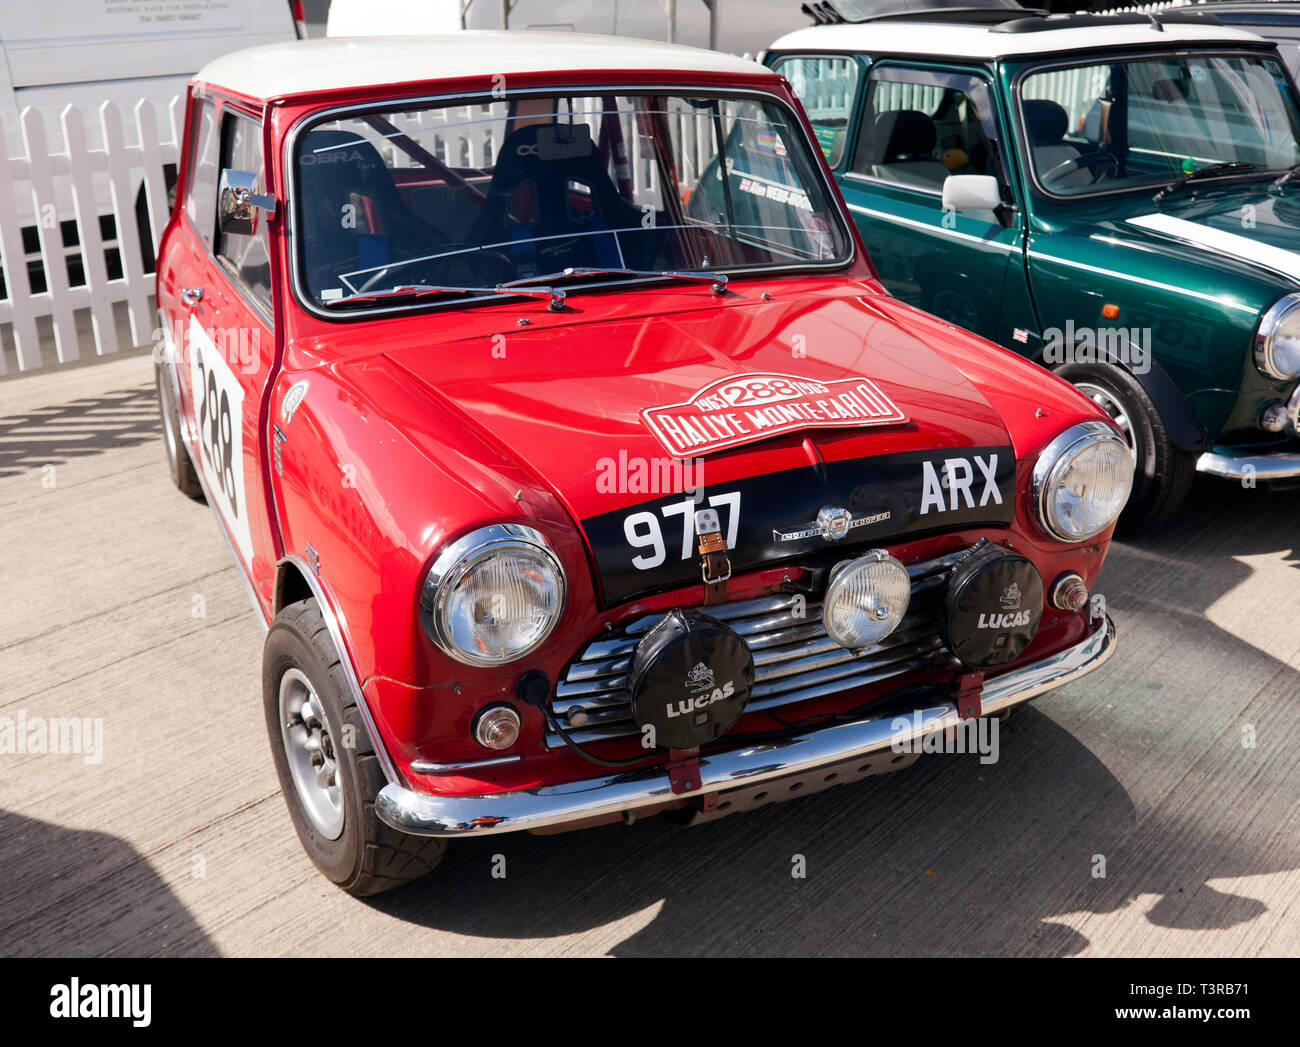 The oldest surviving BMC works Mini Cooper on display at the 2019 Silverstone Classic Media Day.  Part of the 50th anniversary celebrations of the Mini. Stock Photo